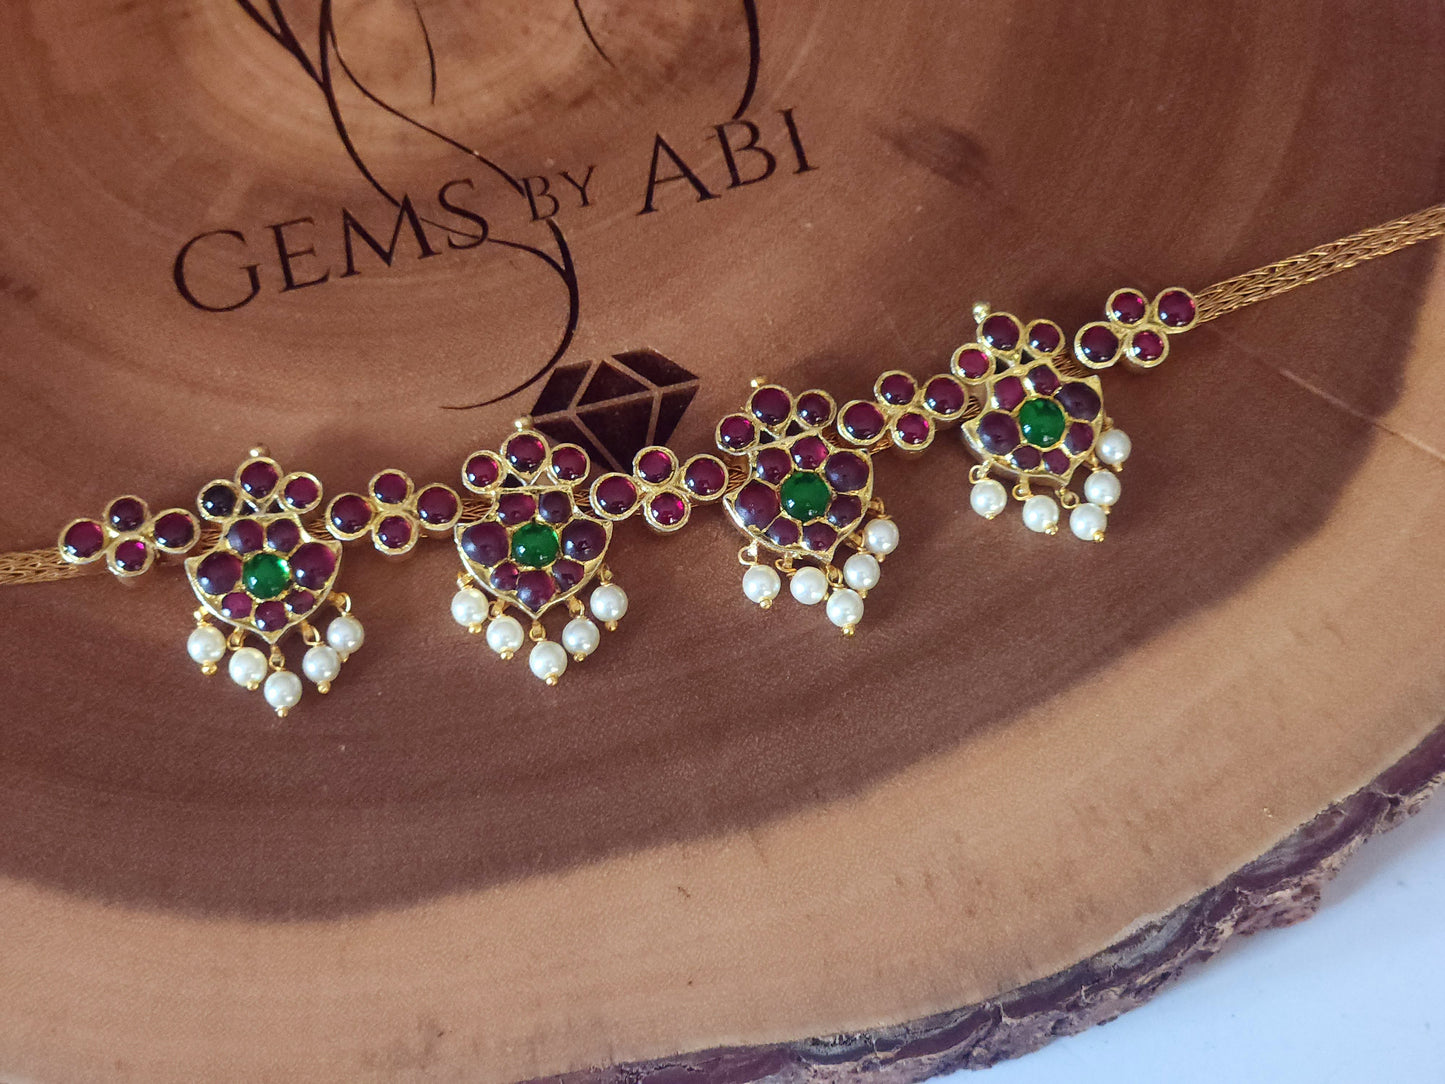 Araku necklace with hanging pearls